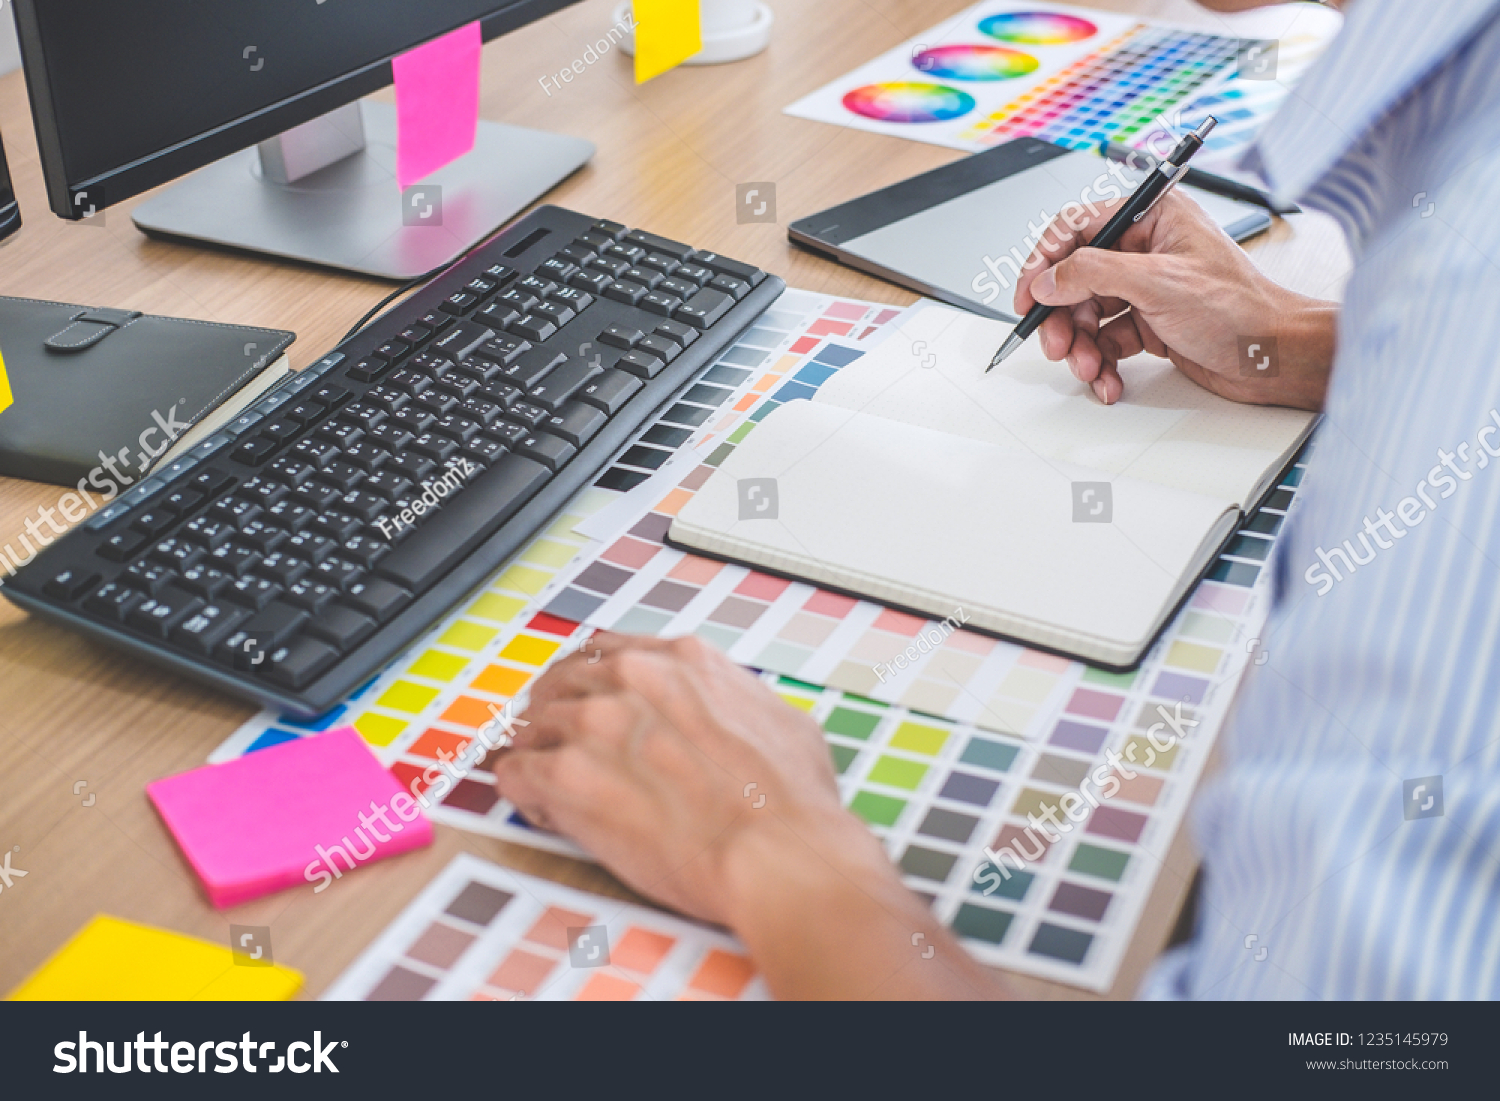 Image of male creative graphic designer working on color selection and drawing on graphics tablet at workplace with work tools and accessories in workspace. #1235145979